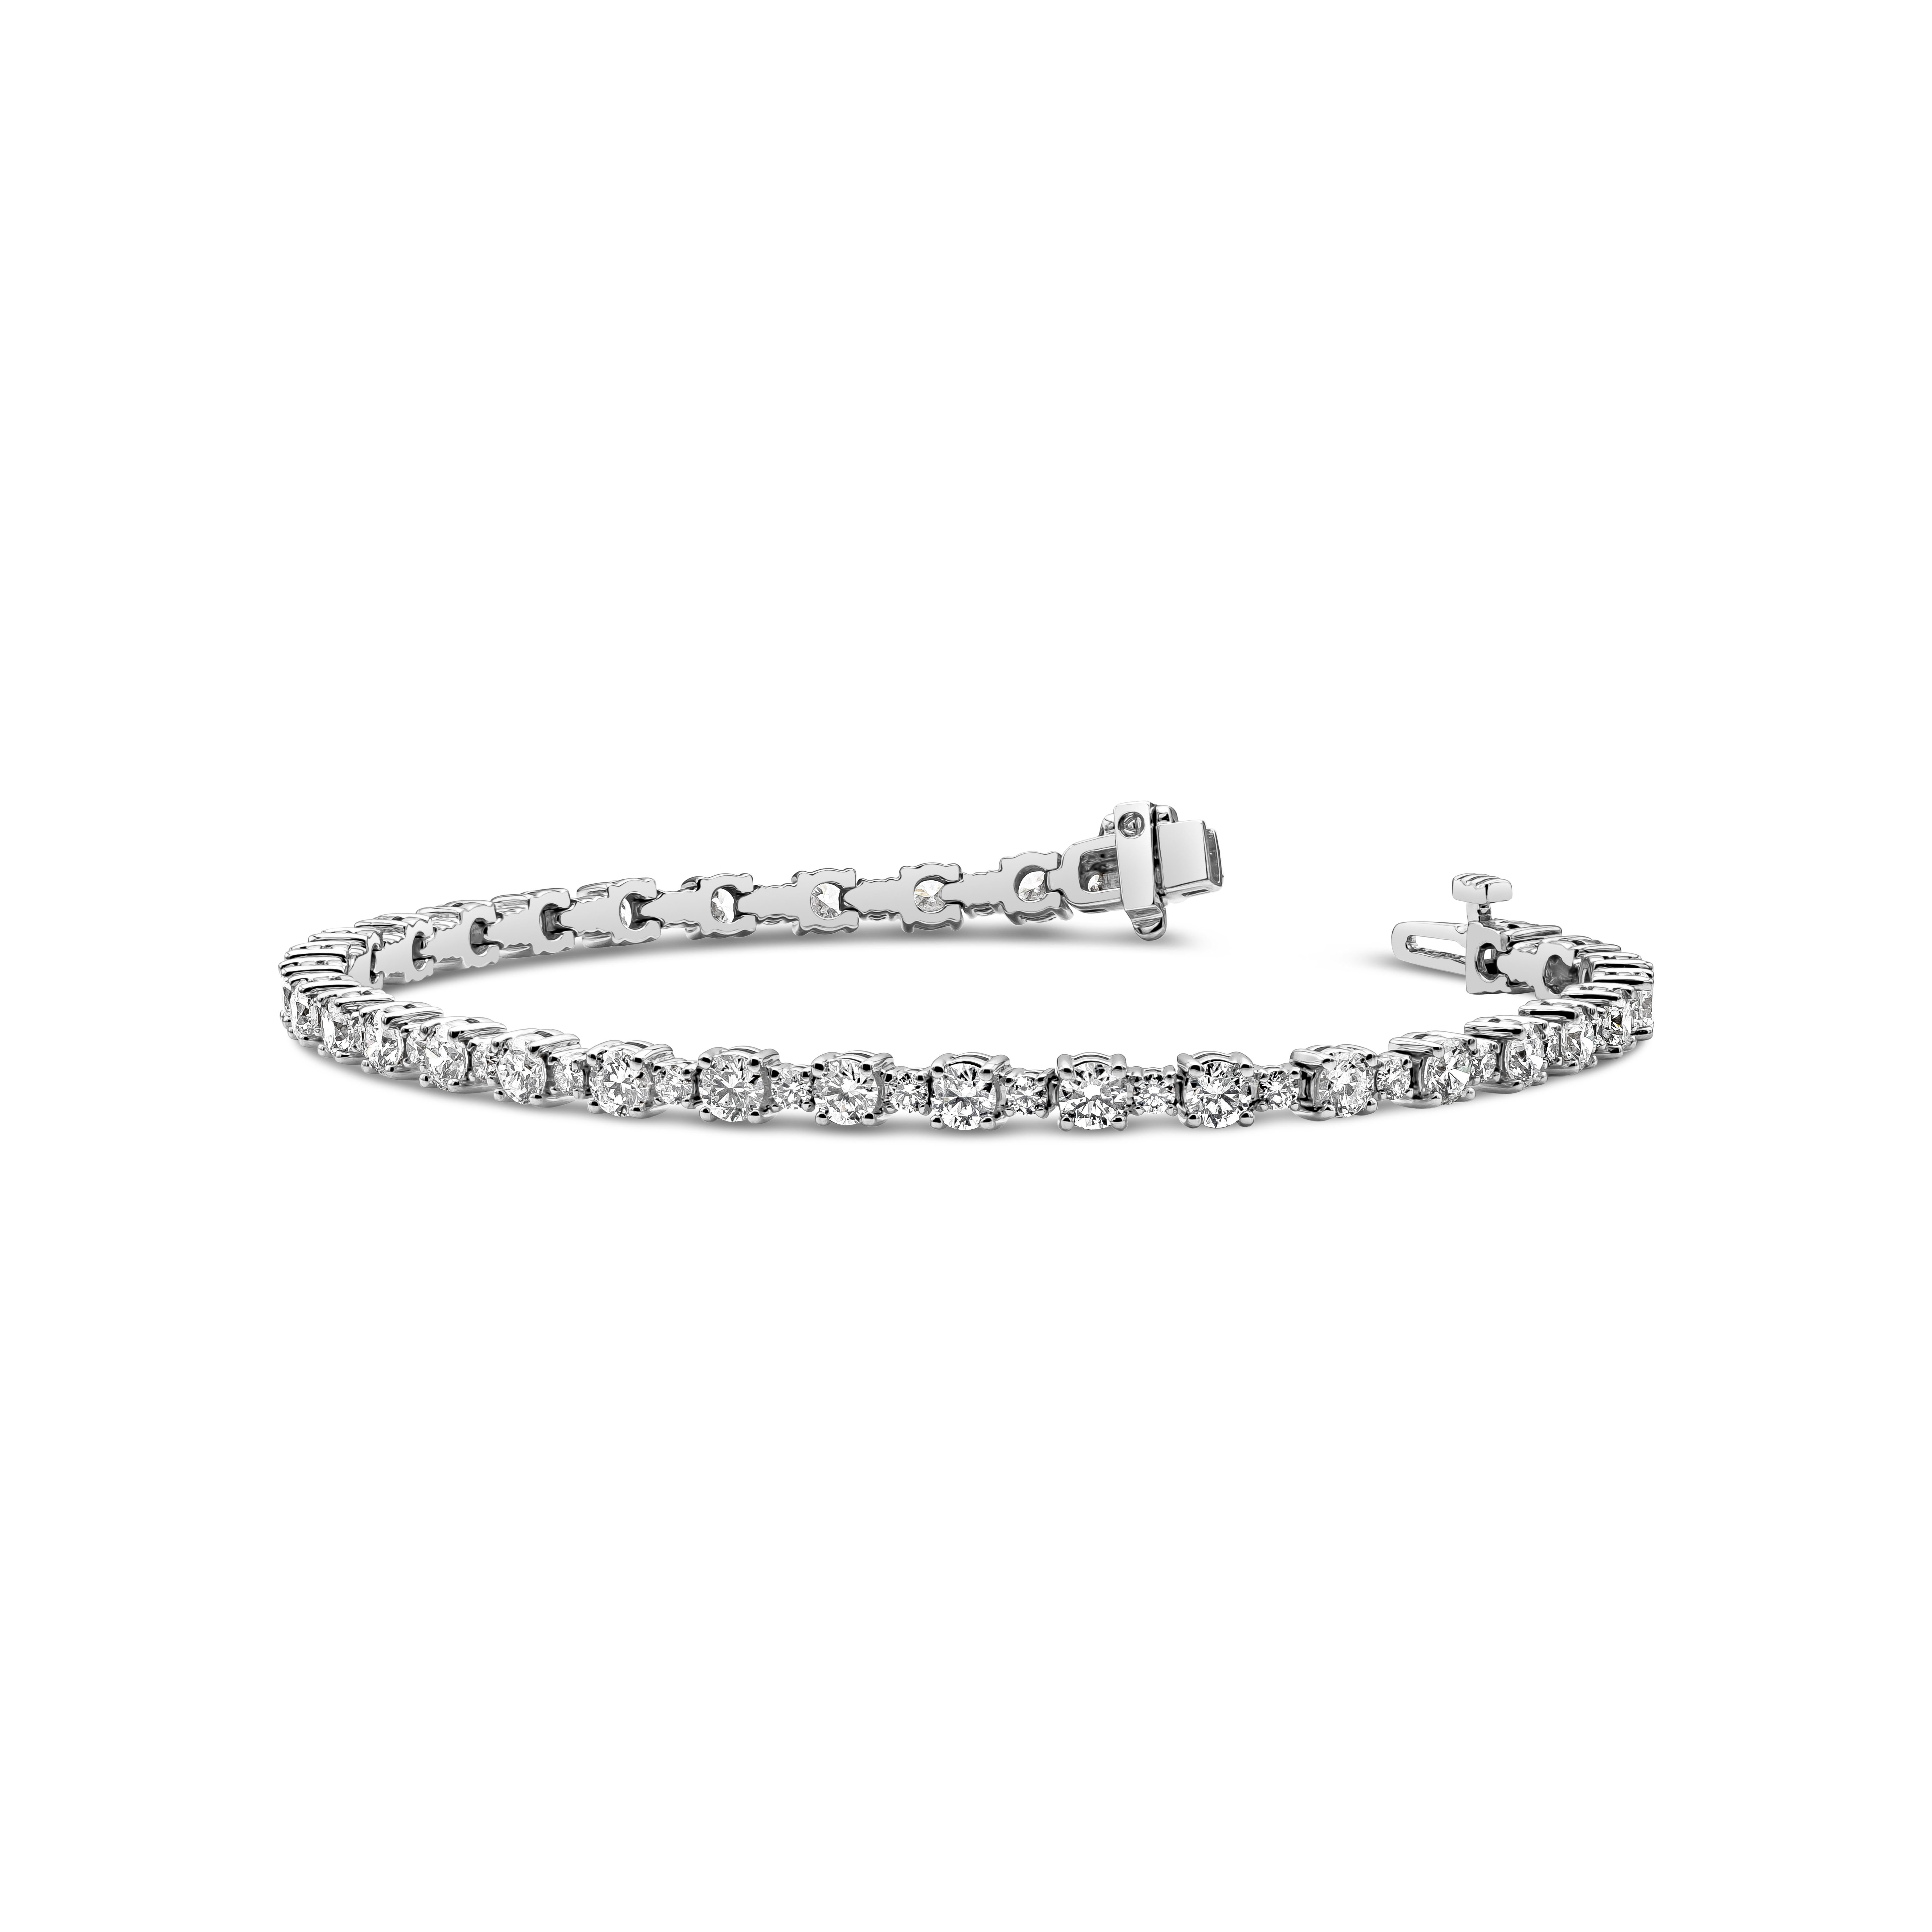 A classic tennis bracelet style showcasing a row of alternating small and big round brilliant diamonds weighing 4.66 carats total, 32 round brilliant diamonds, 3.10mm in size weighs 3.79 carats total. Smaller round brilliant diamonds, 32 pieces and